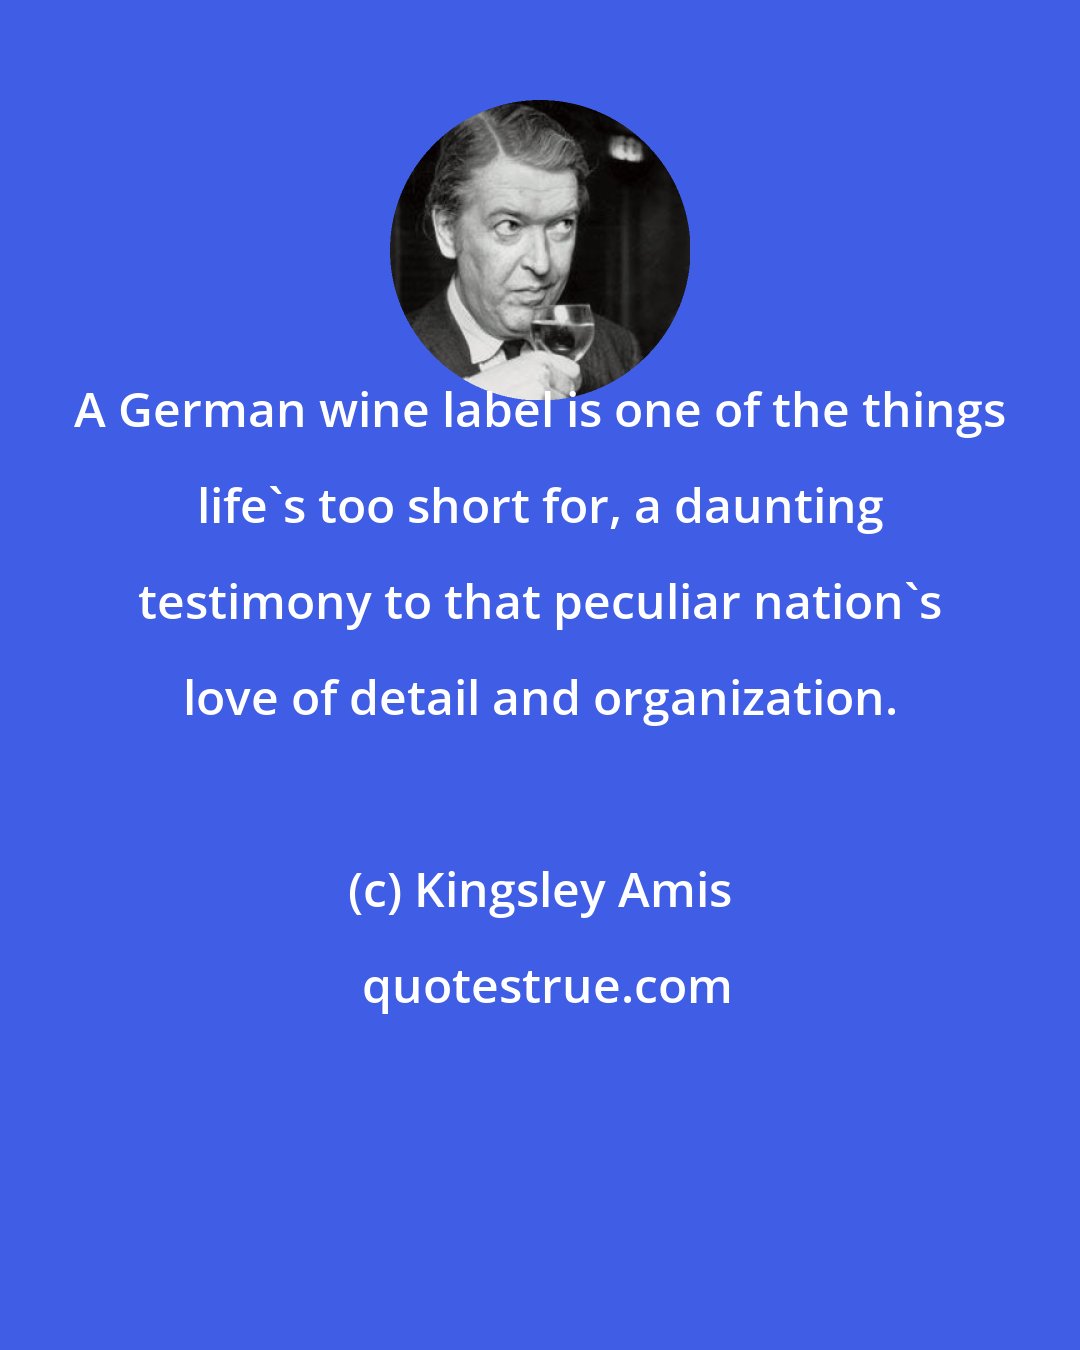 Kingsley Amis: A German wine label is one of the things life's too short for, a daunting testimony to that peculiar nation's love of detail and organization.